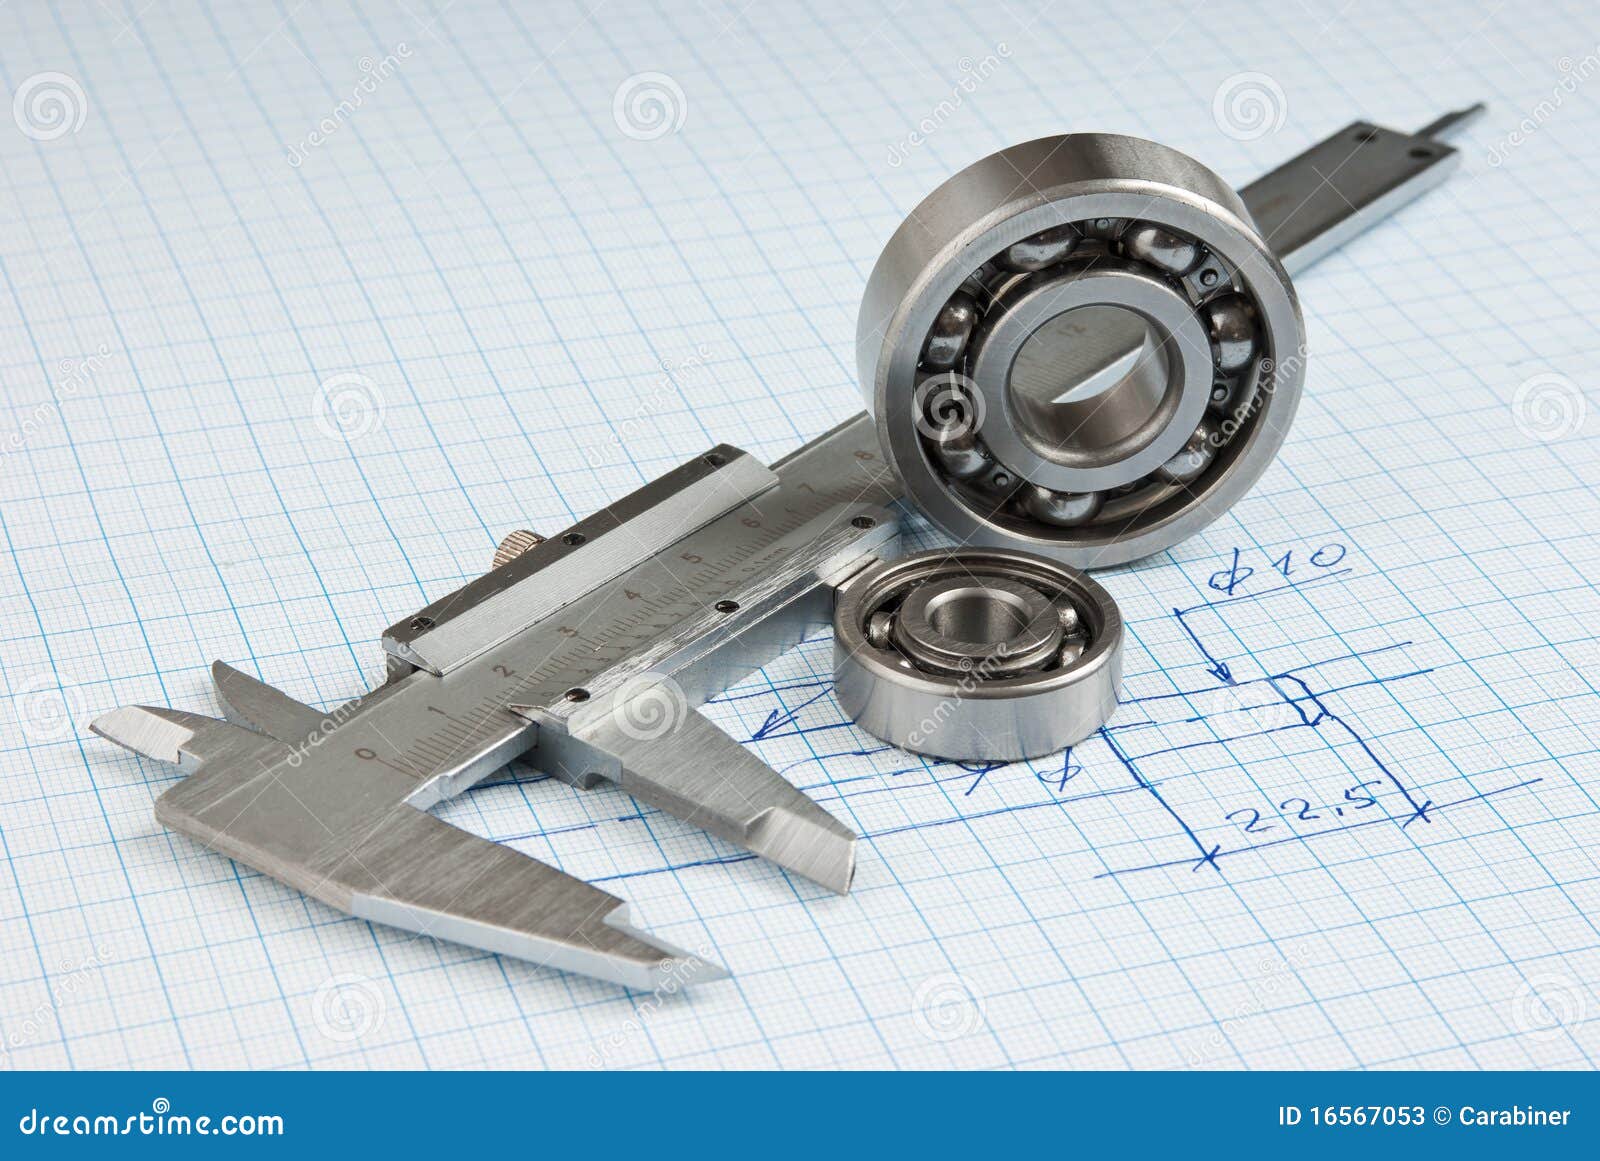 technical drawing and callipers with bearing